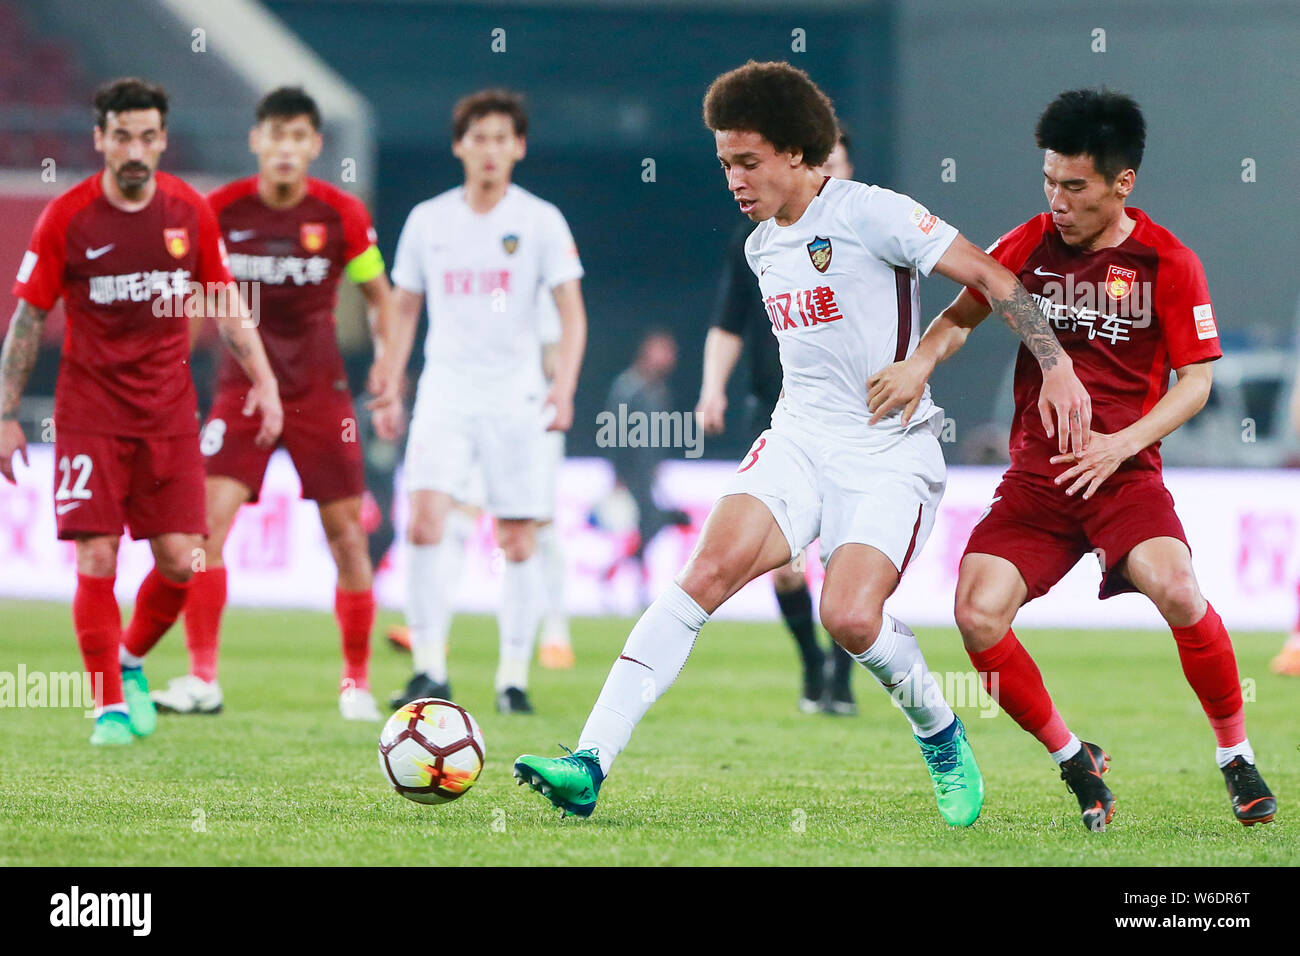 Belgian football player Axel Witsel of Tianjin Quanjian, left, challenges a player of Hebei China Fortune in their 8th round match during the 2018 Chi Stock Photo